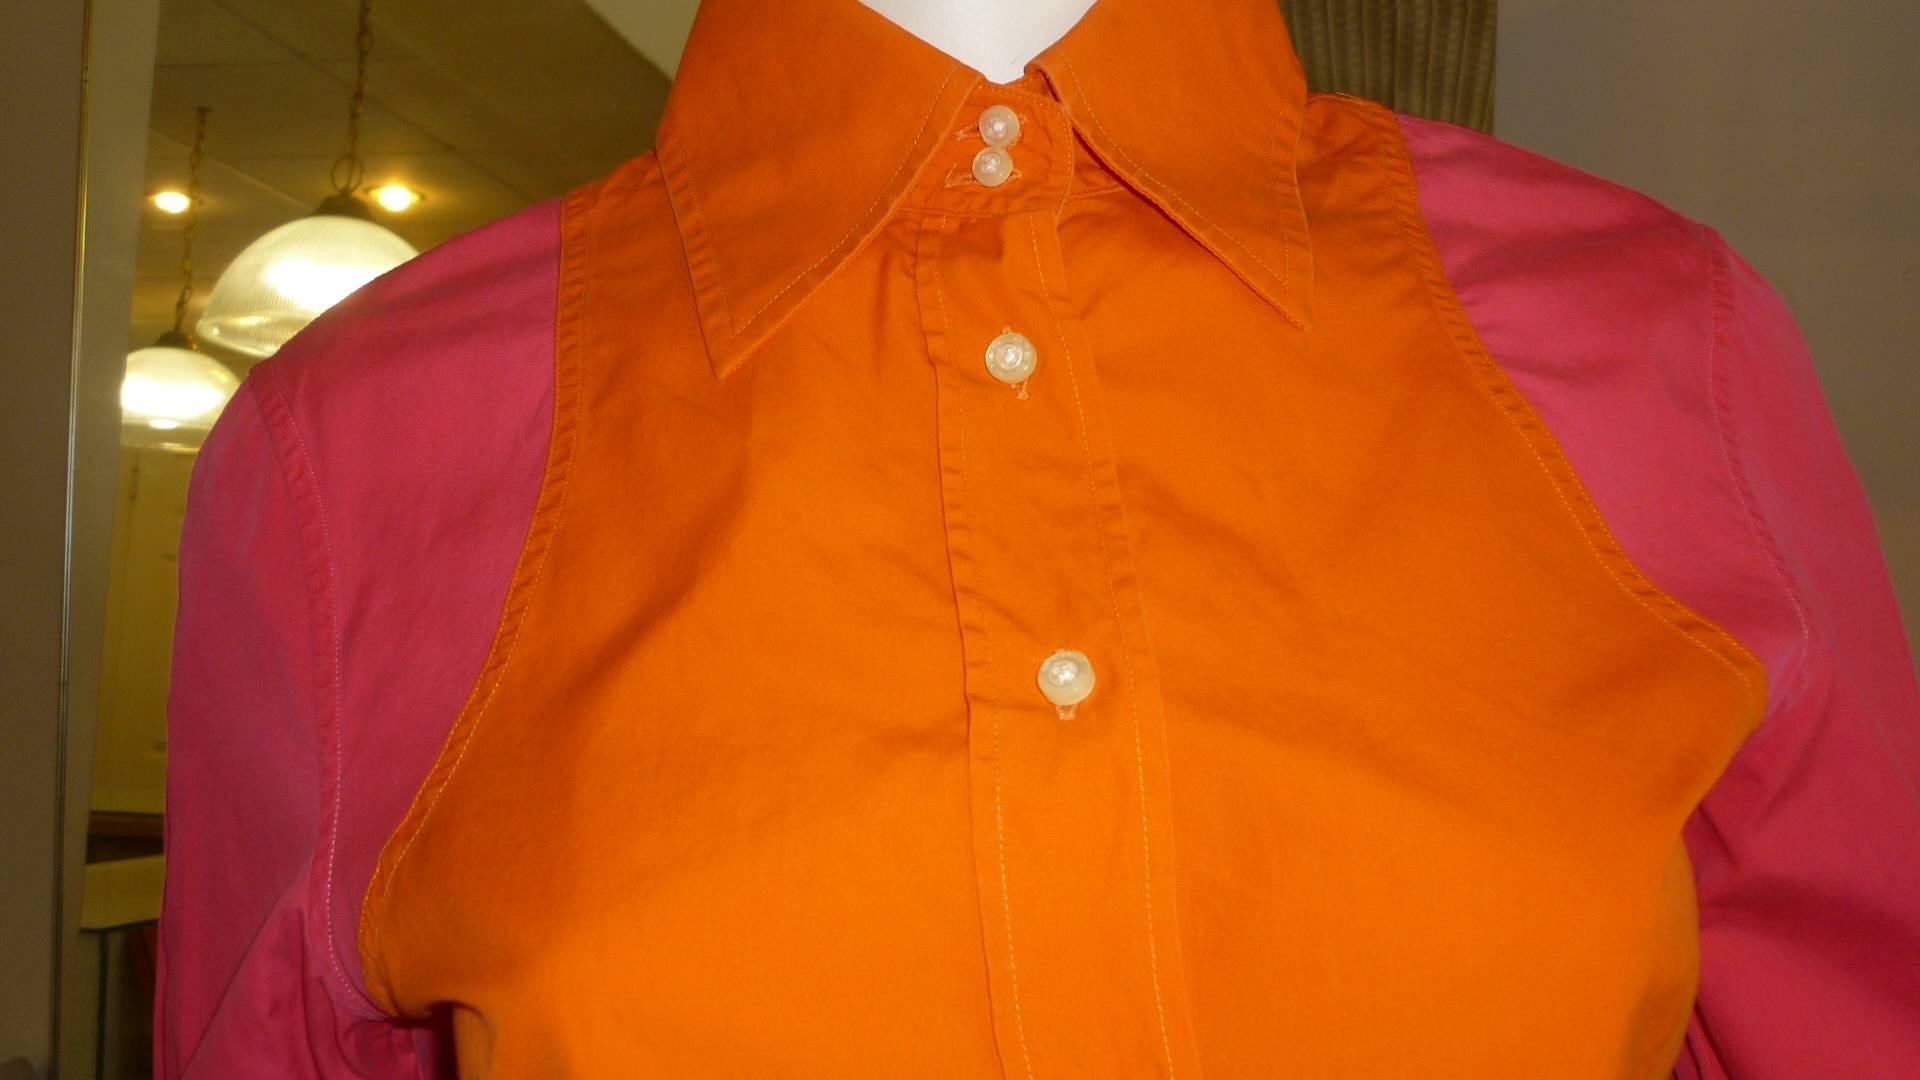 Orange and fuschi do go together! Will add a pop of color to any outfit.